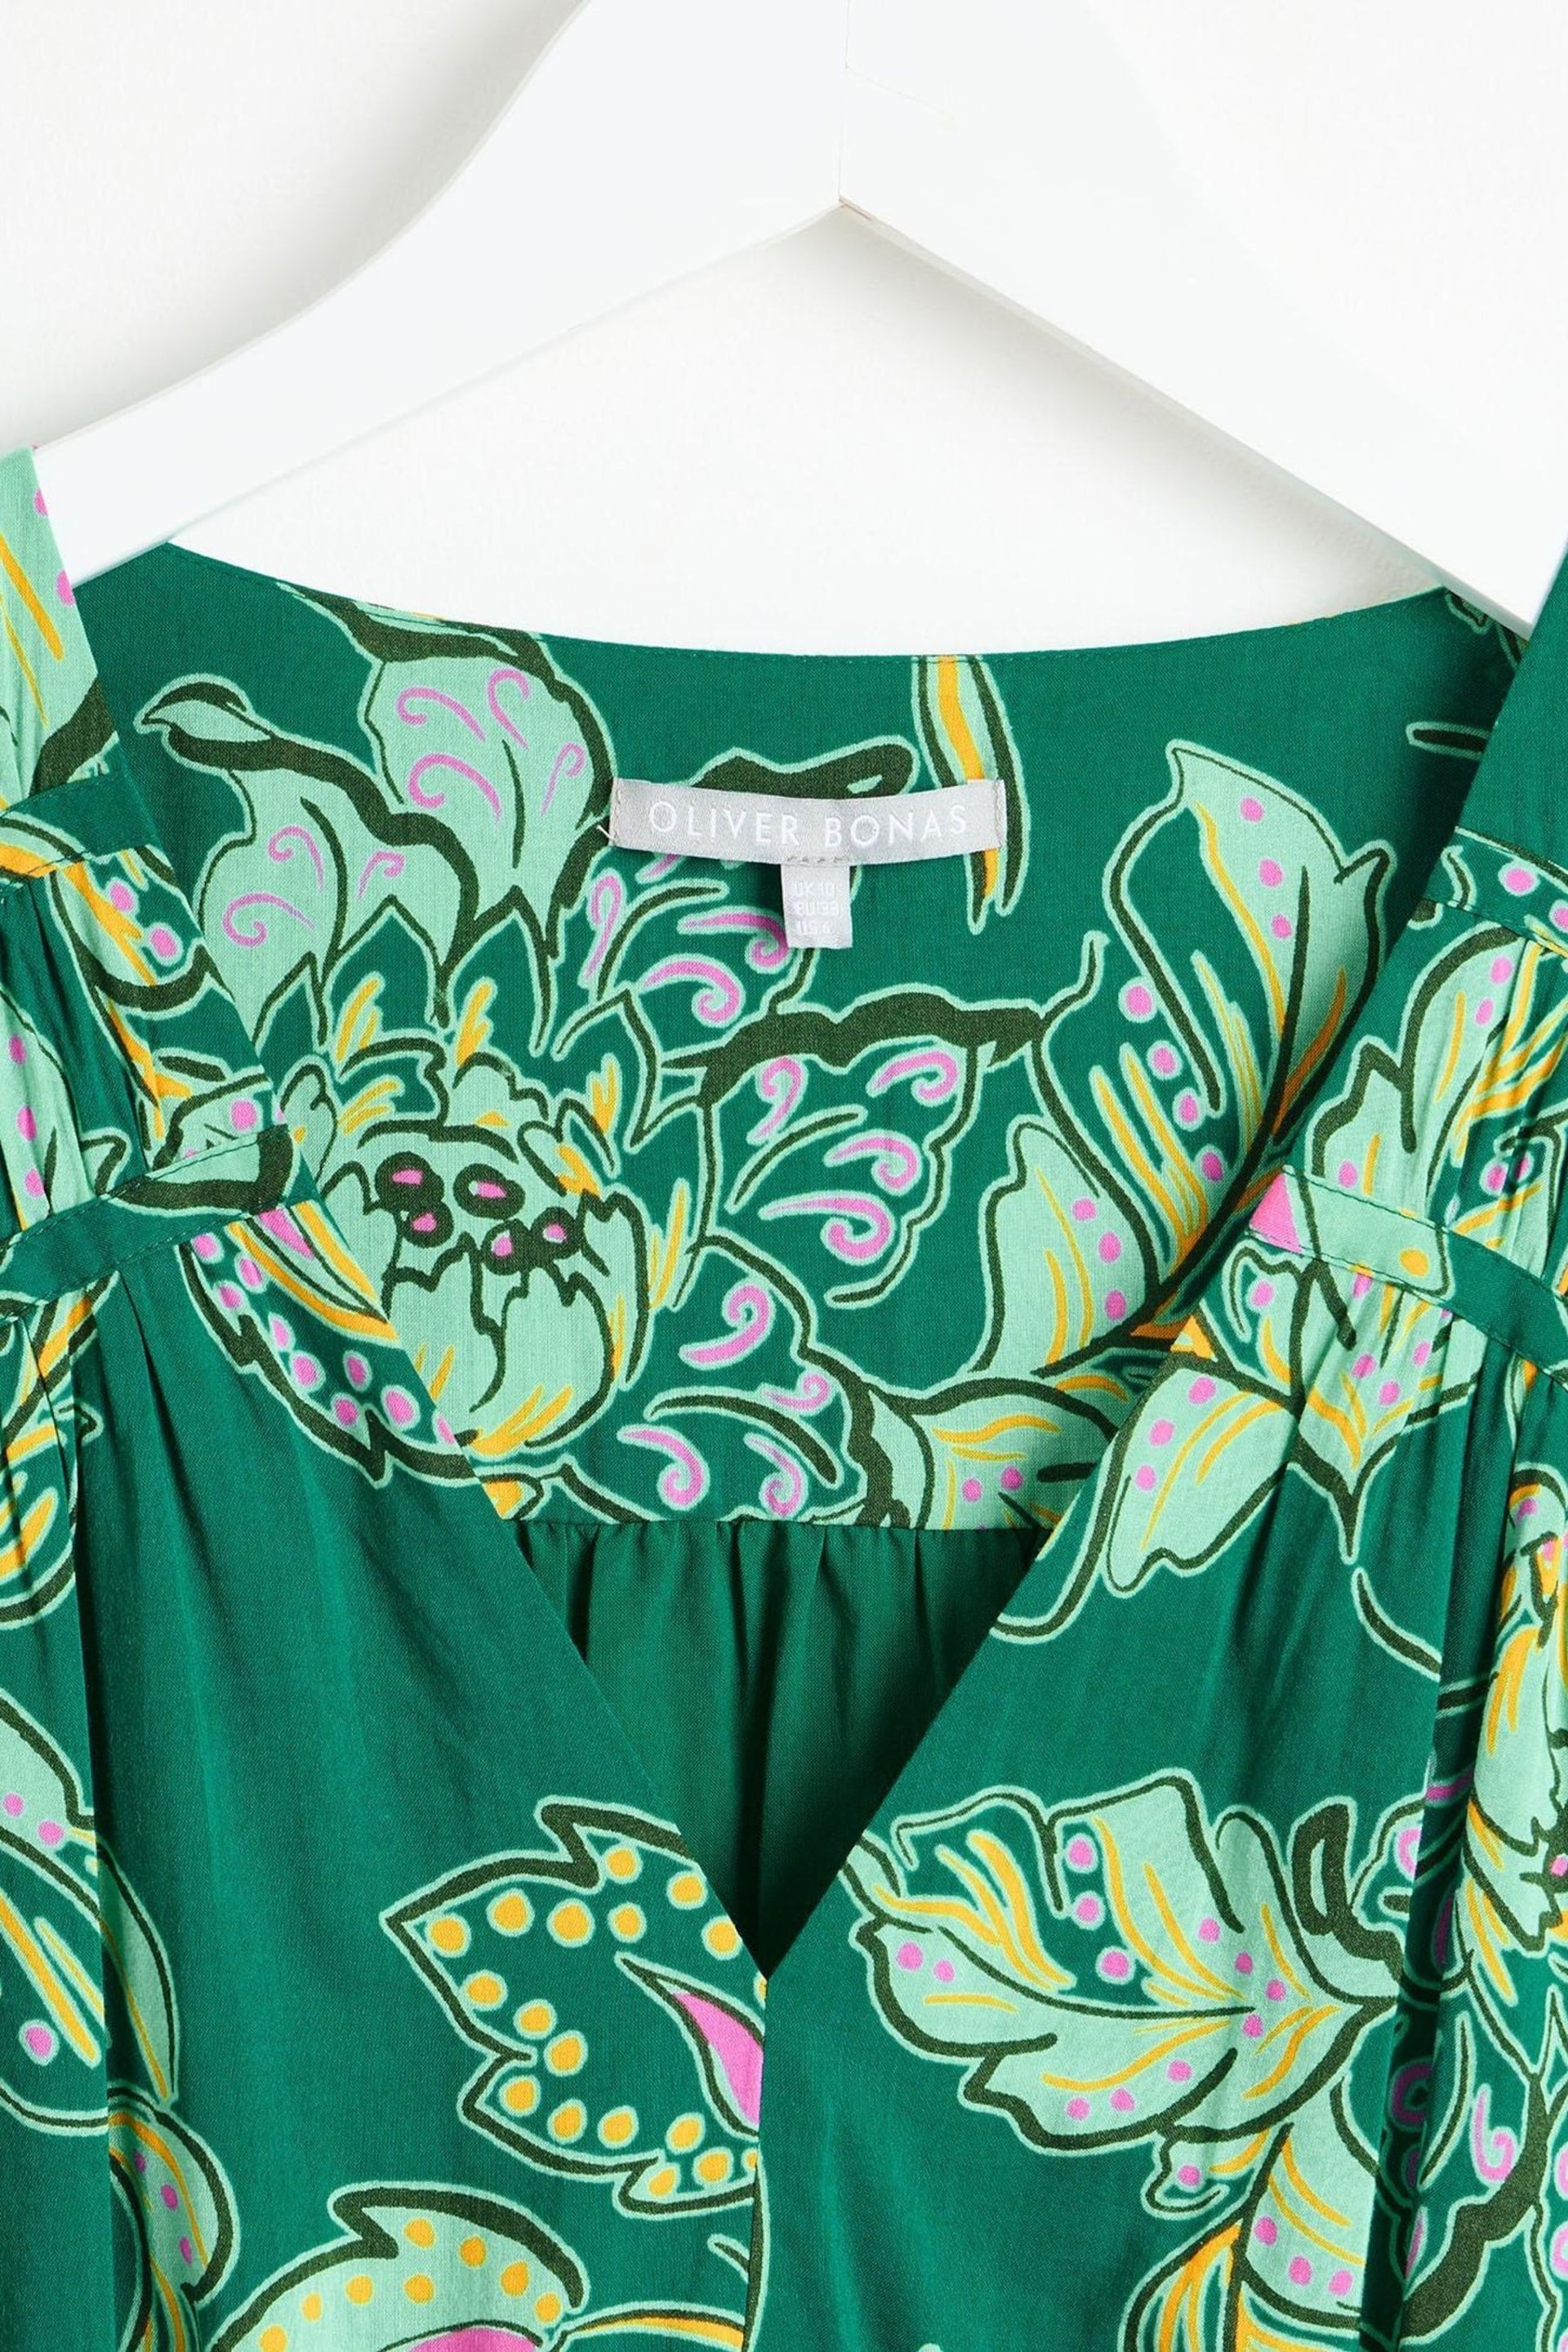 Oliver Bonas Green Paisley Floral Tiered Mini Dress - Image 3 of 6